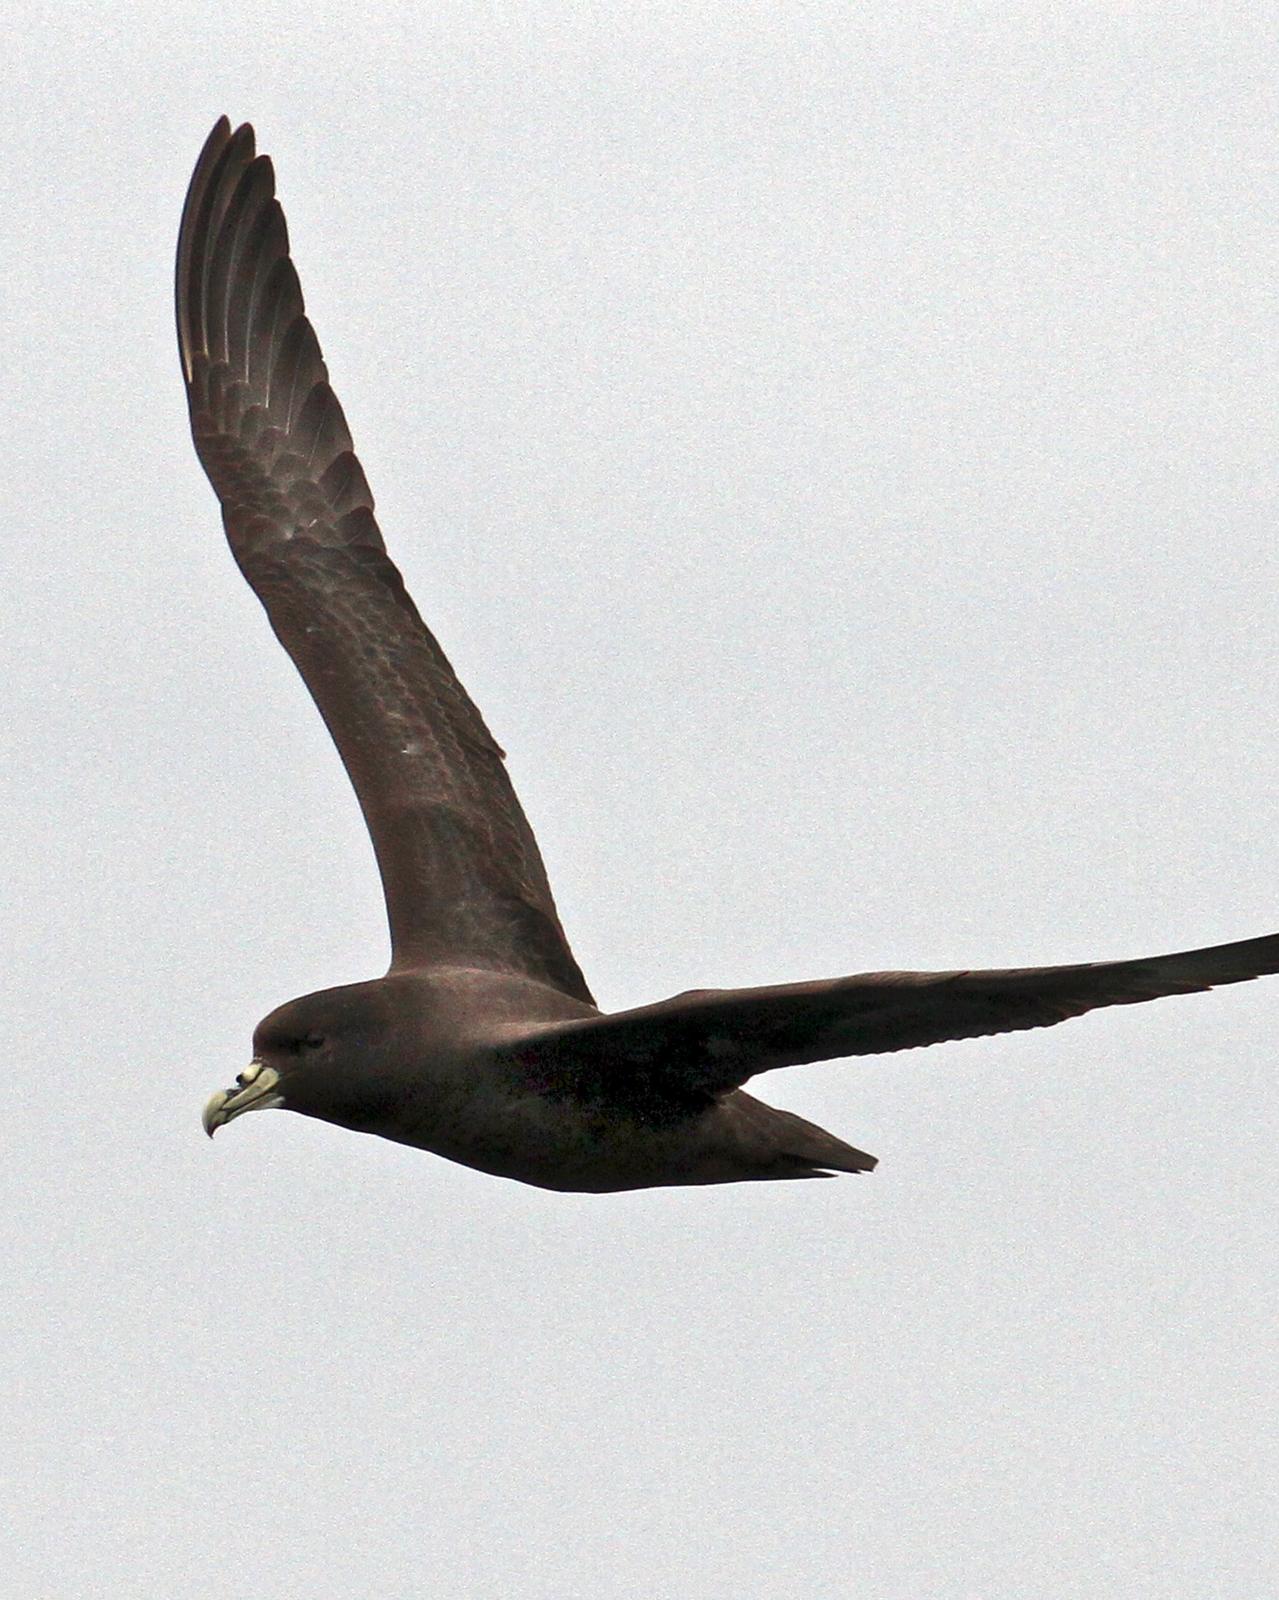 White-chinned Petrel Photo by Knut Hansen